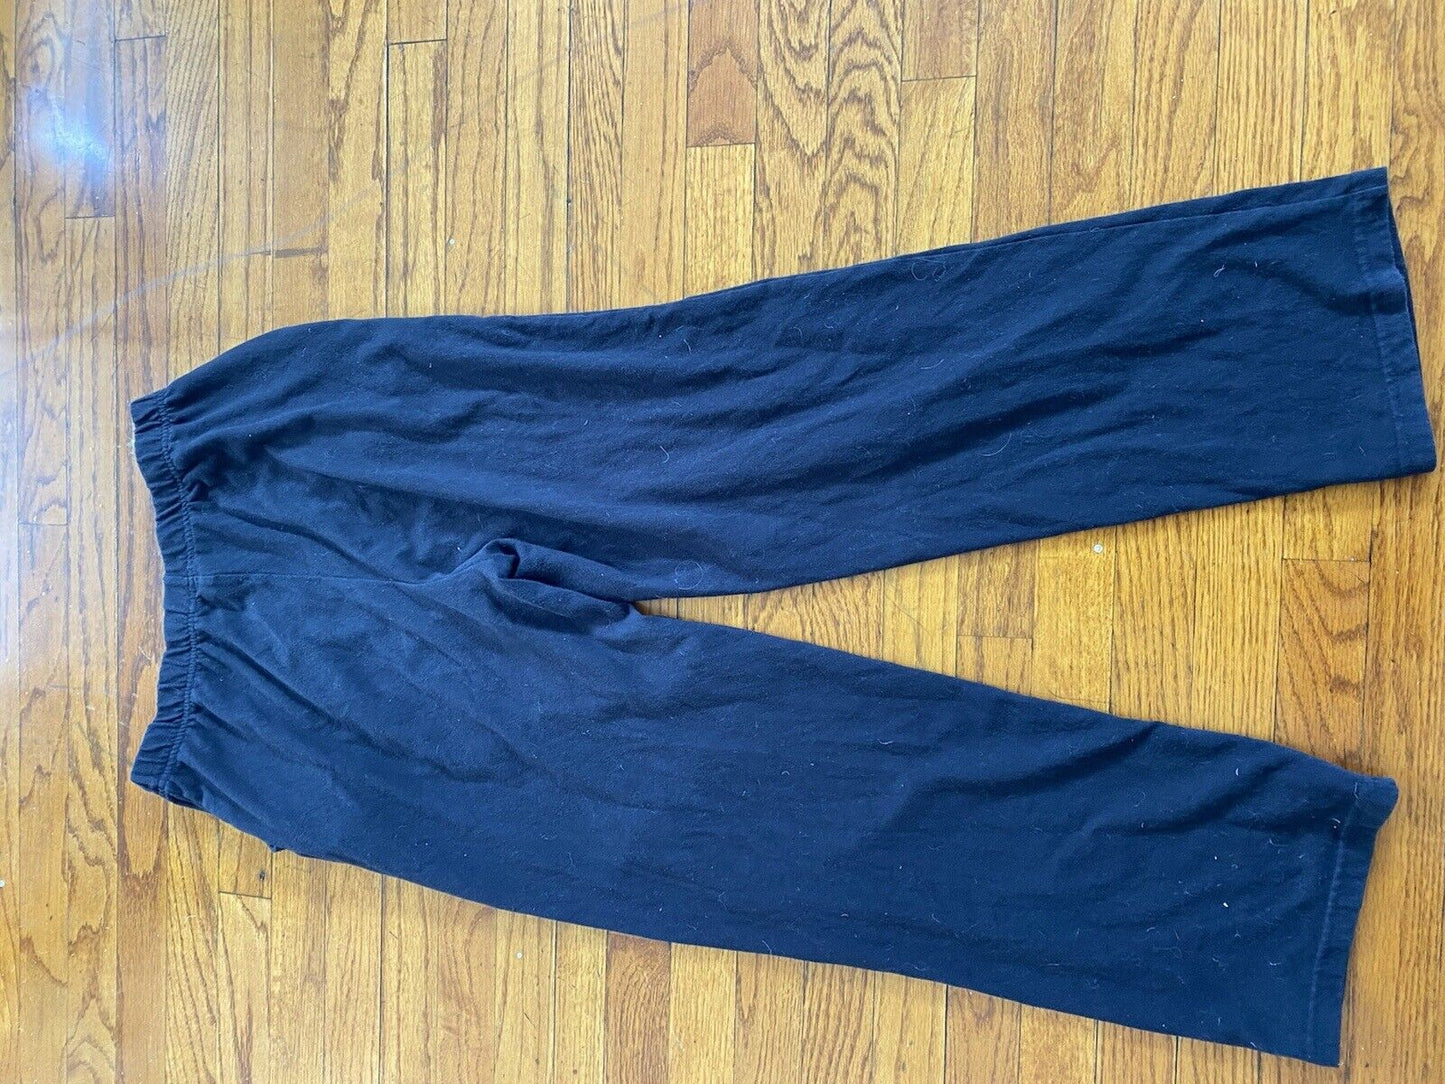 Black Lounge Pants - White Stag - Size Small